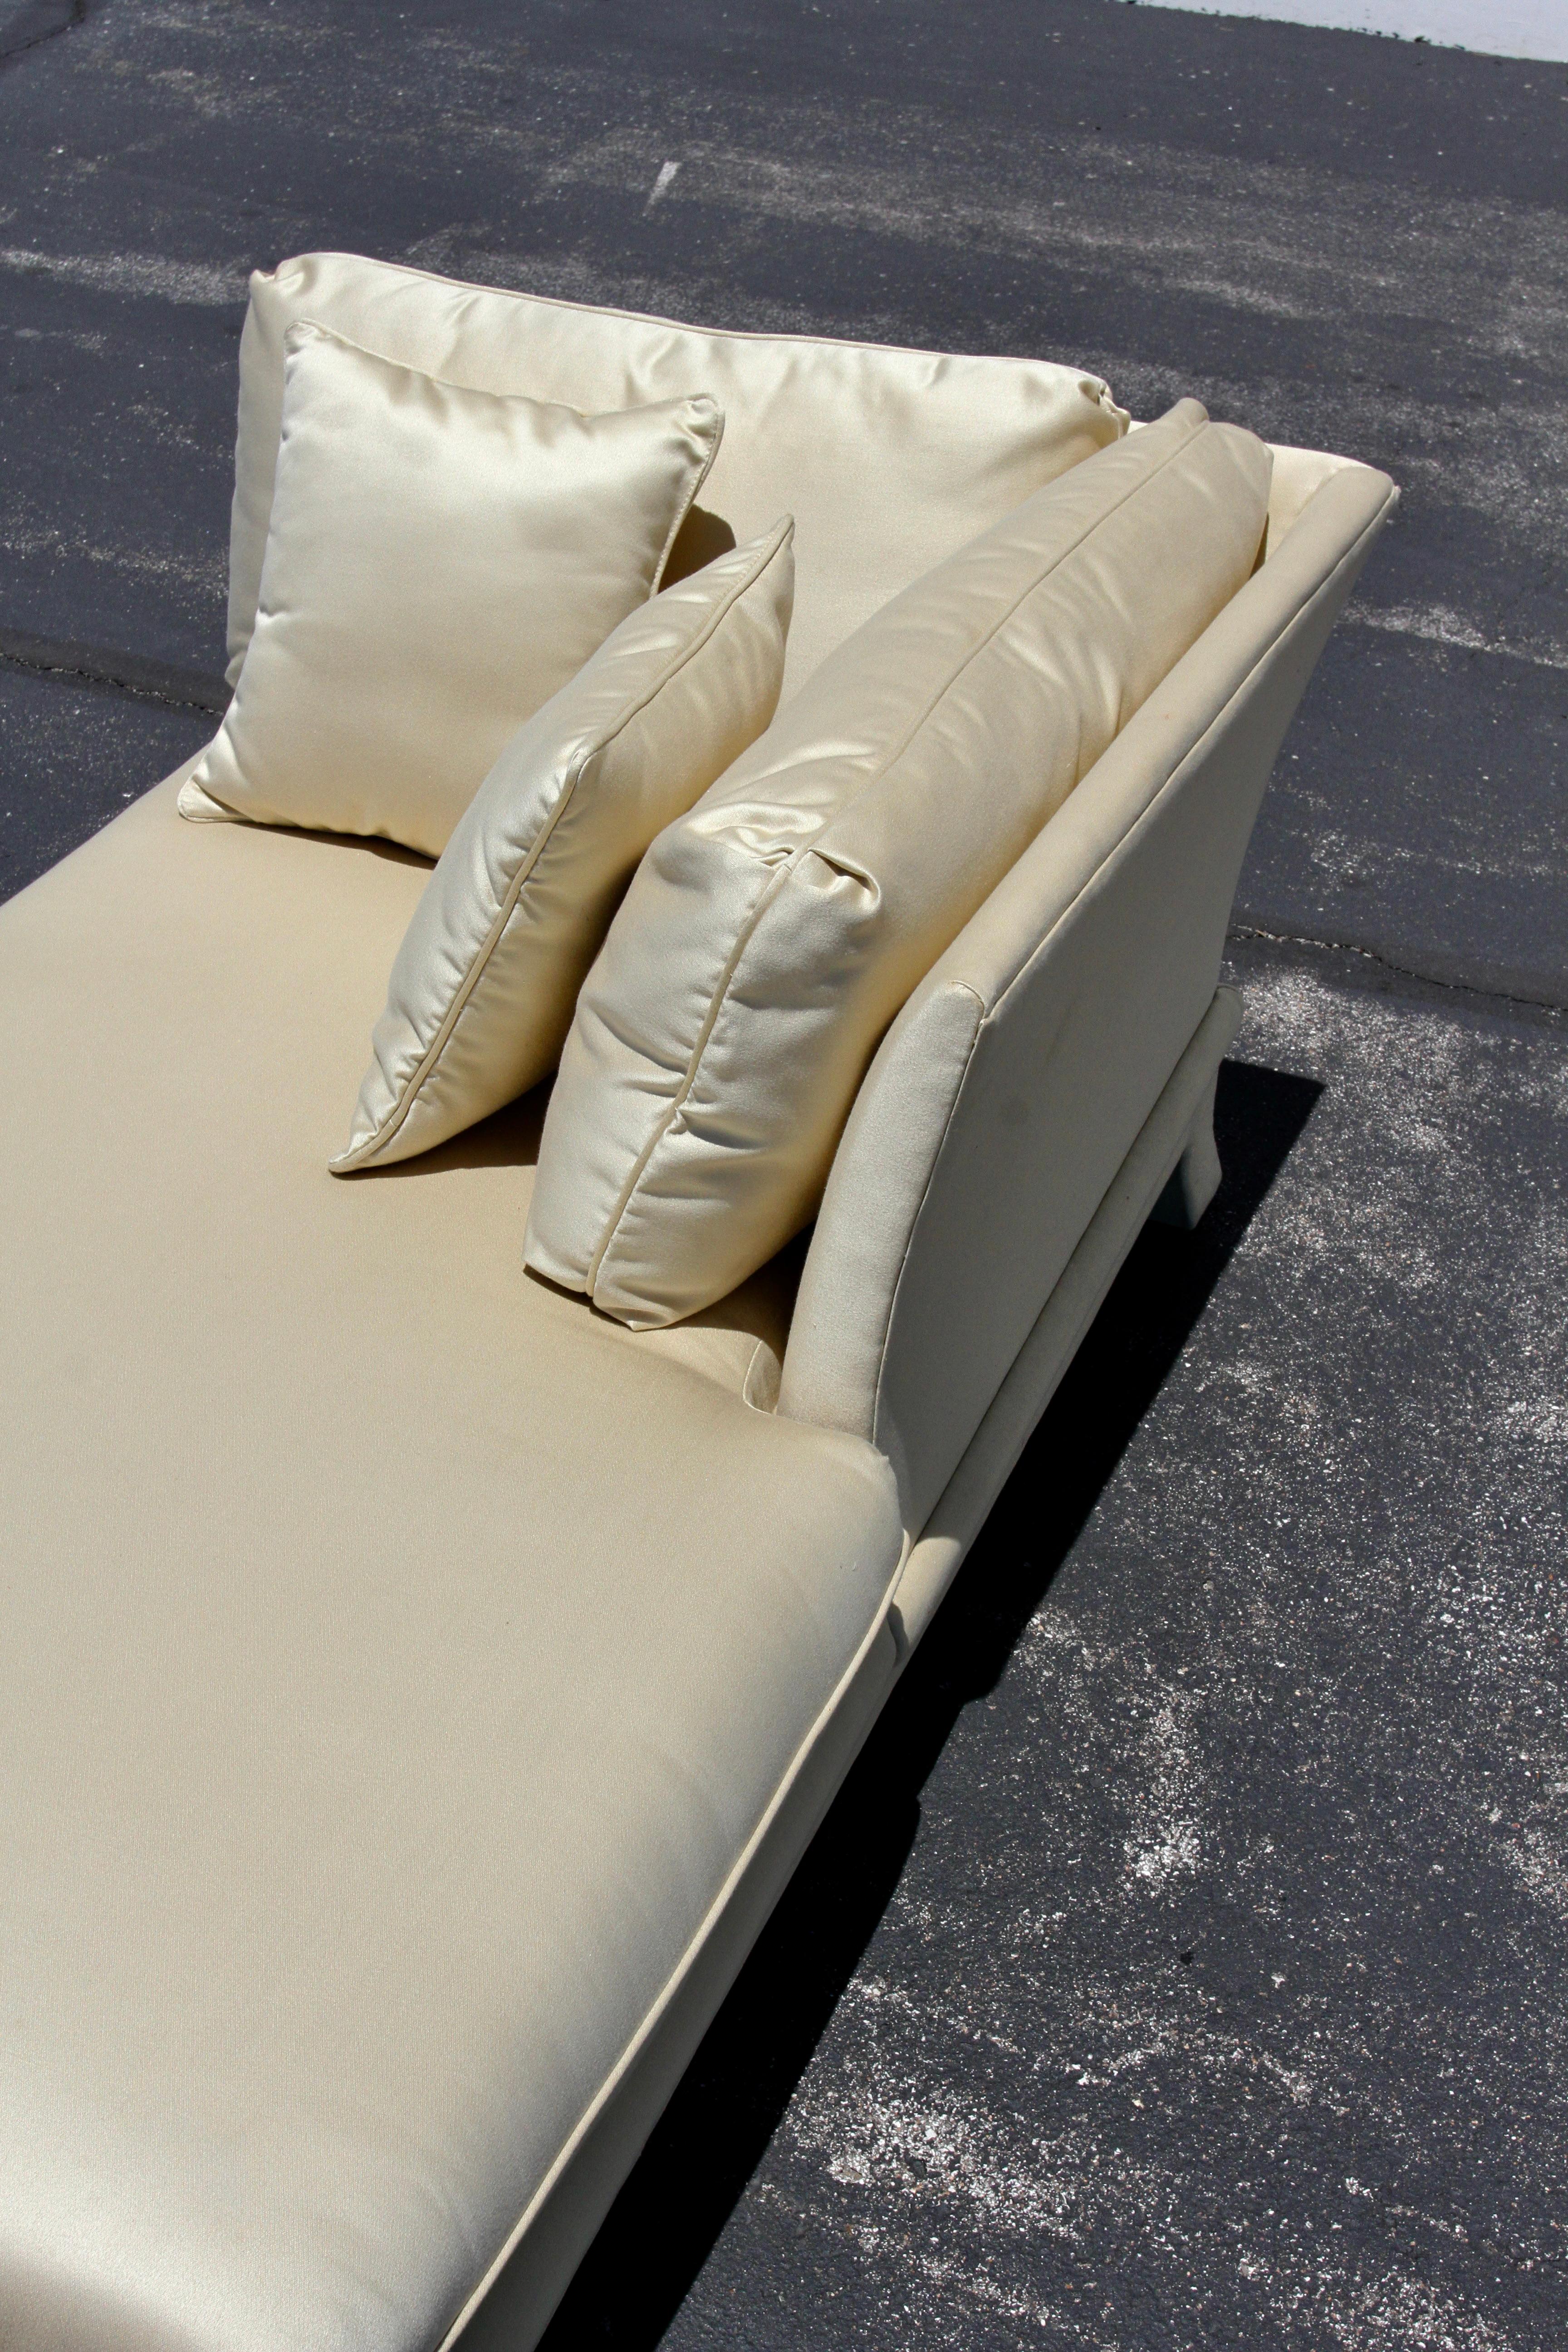 1970s Karl Springer Style Chaise Lounge Sofa by Bernhardt Flair in Golden Silk For Sale 1